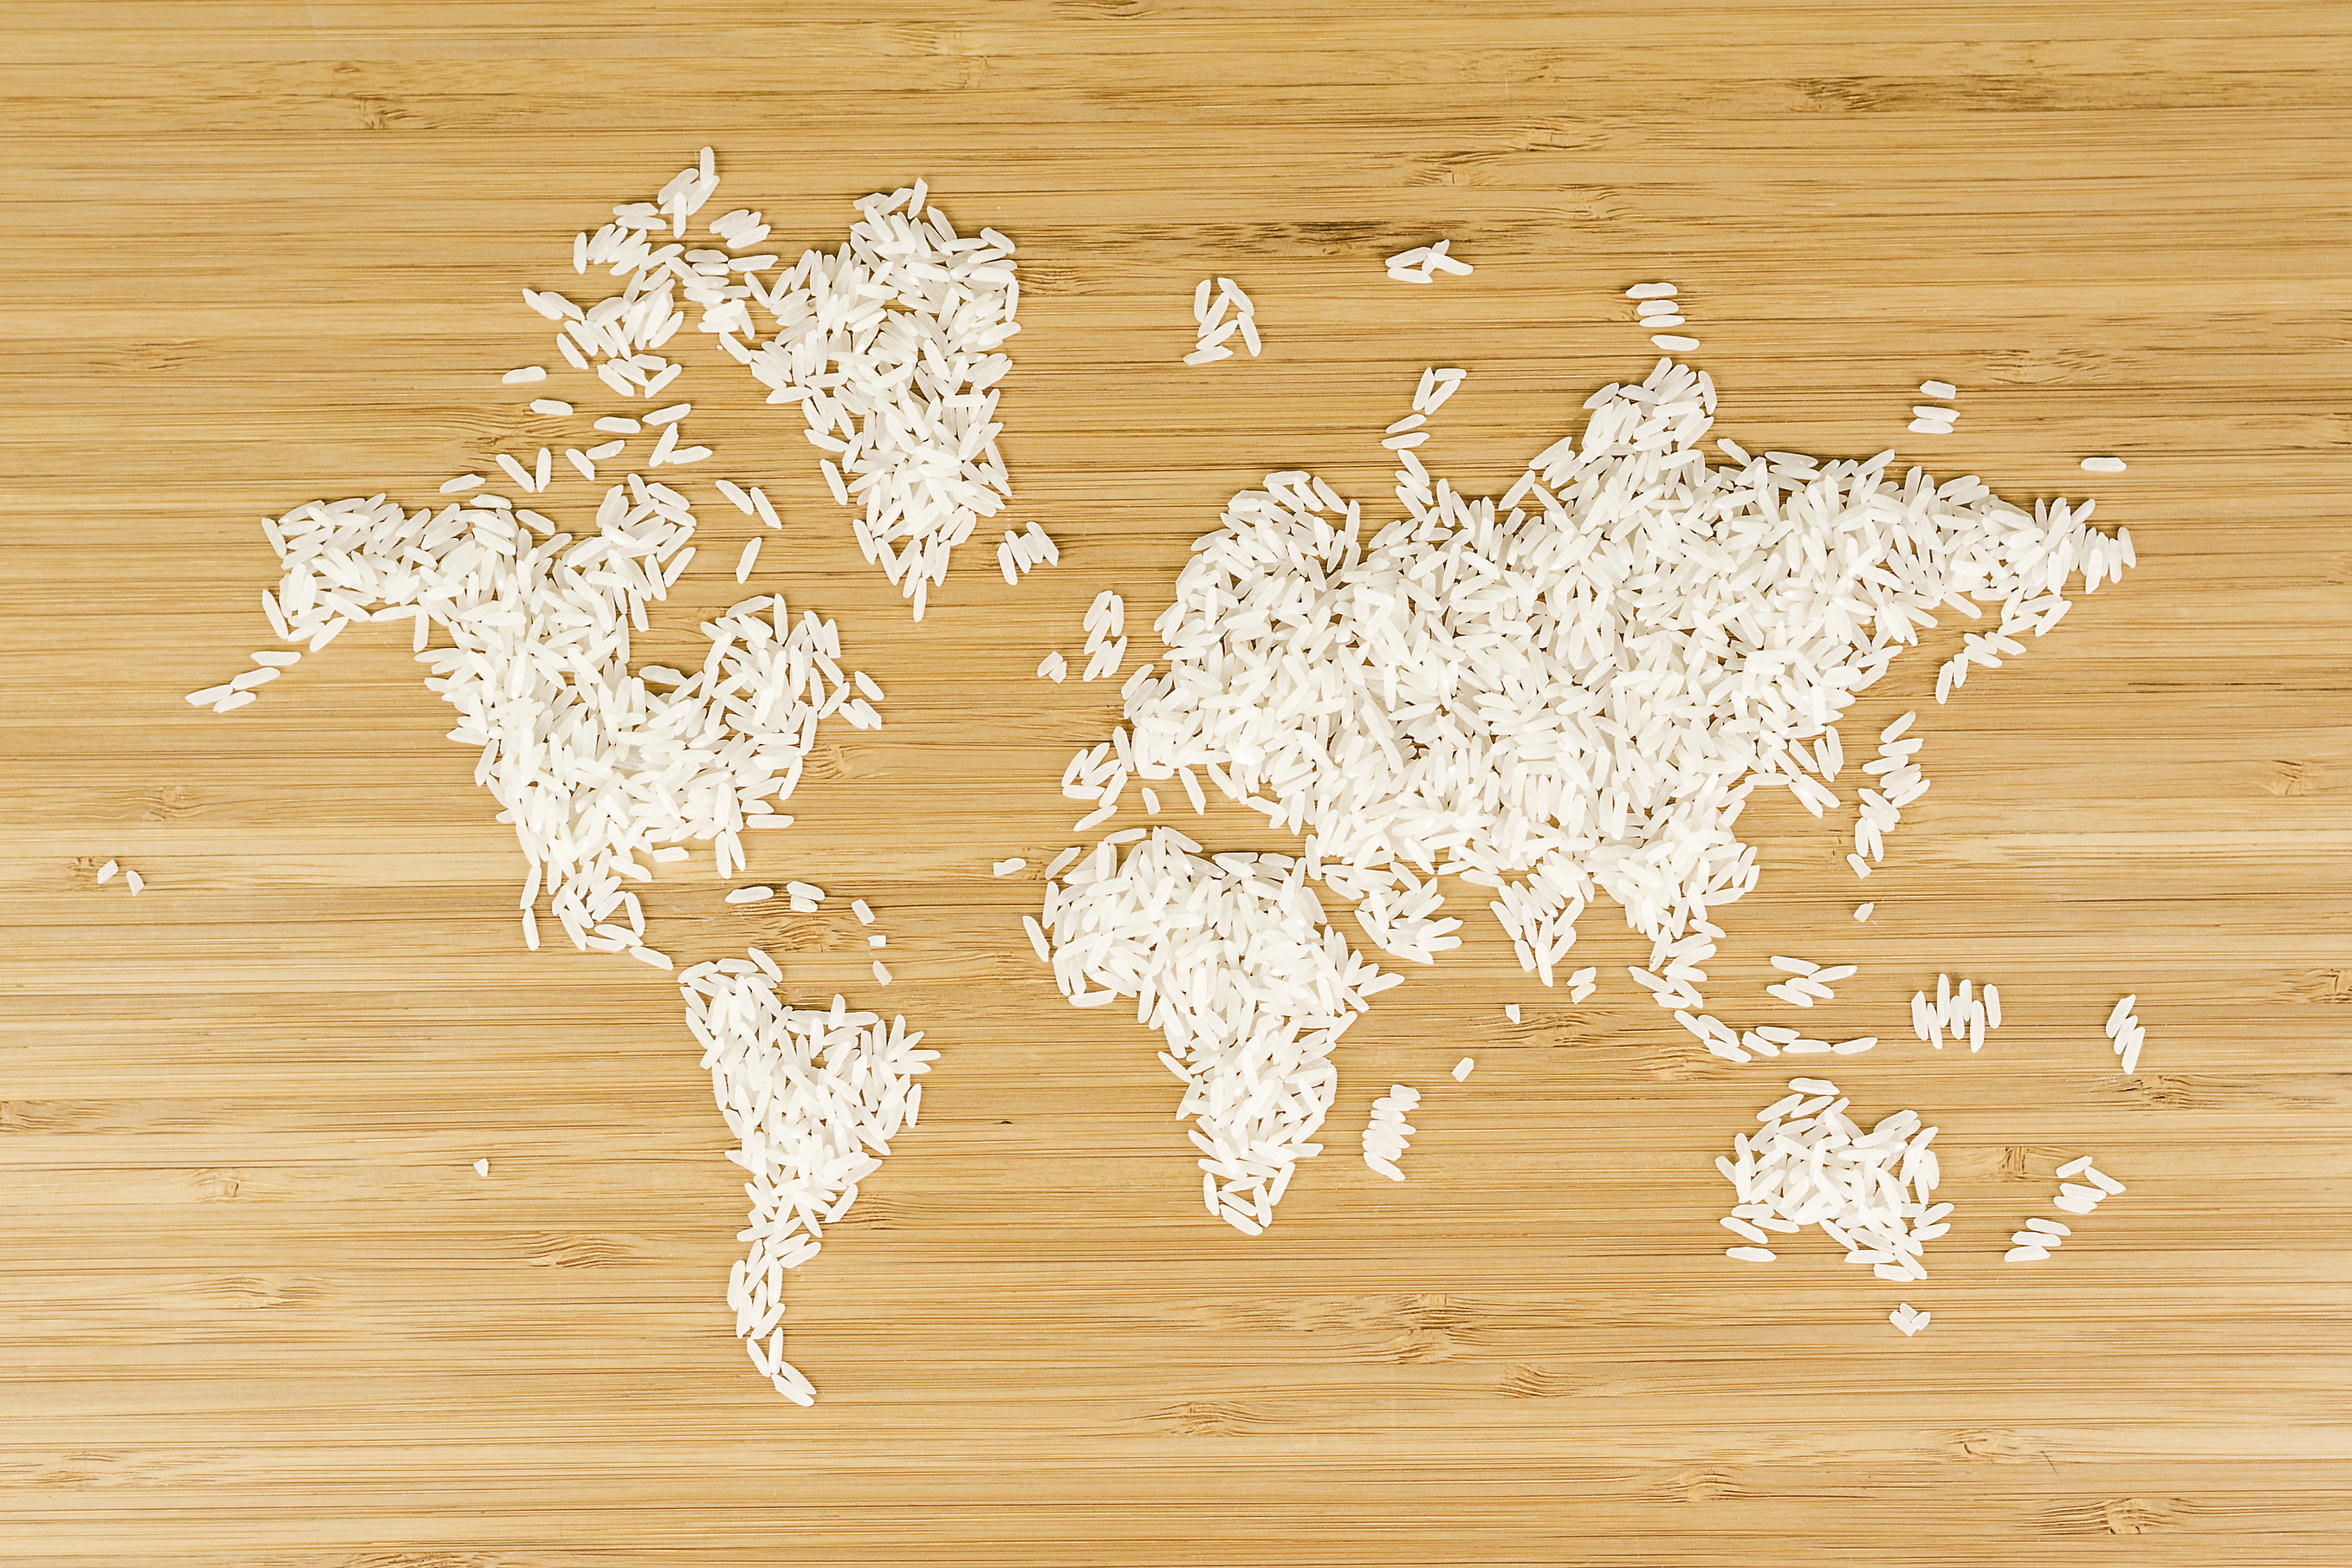 map of the world made of white rice 1 "